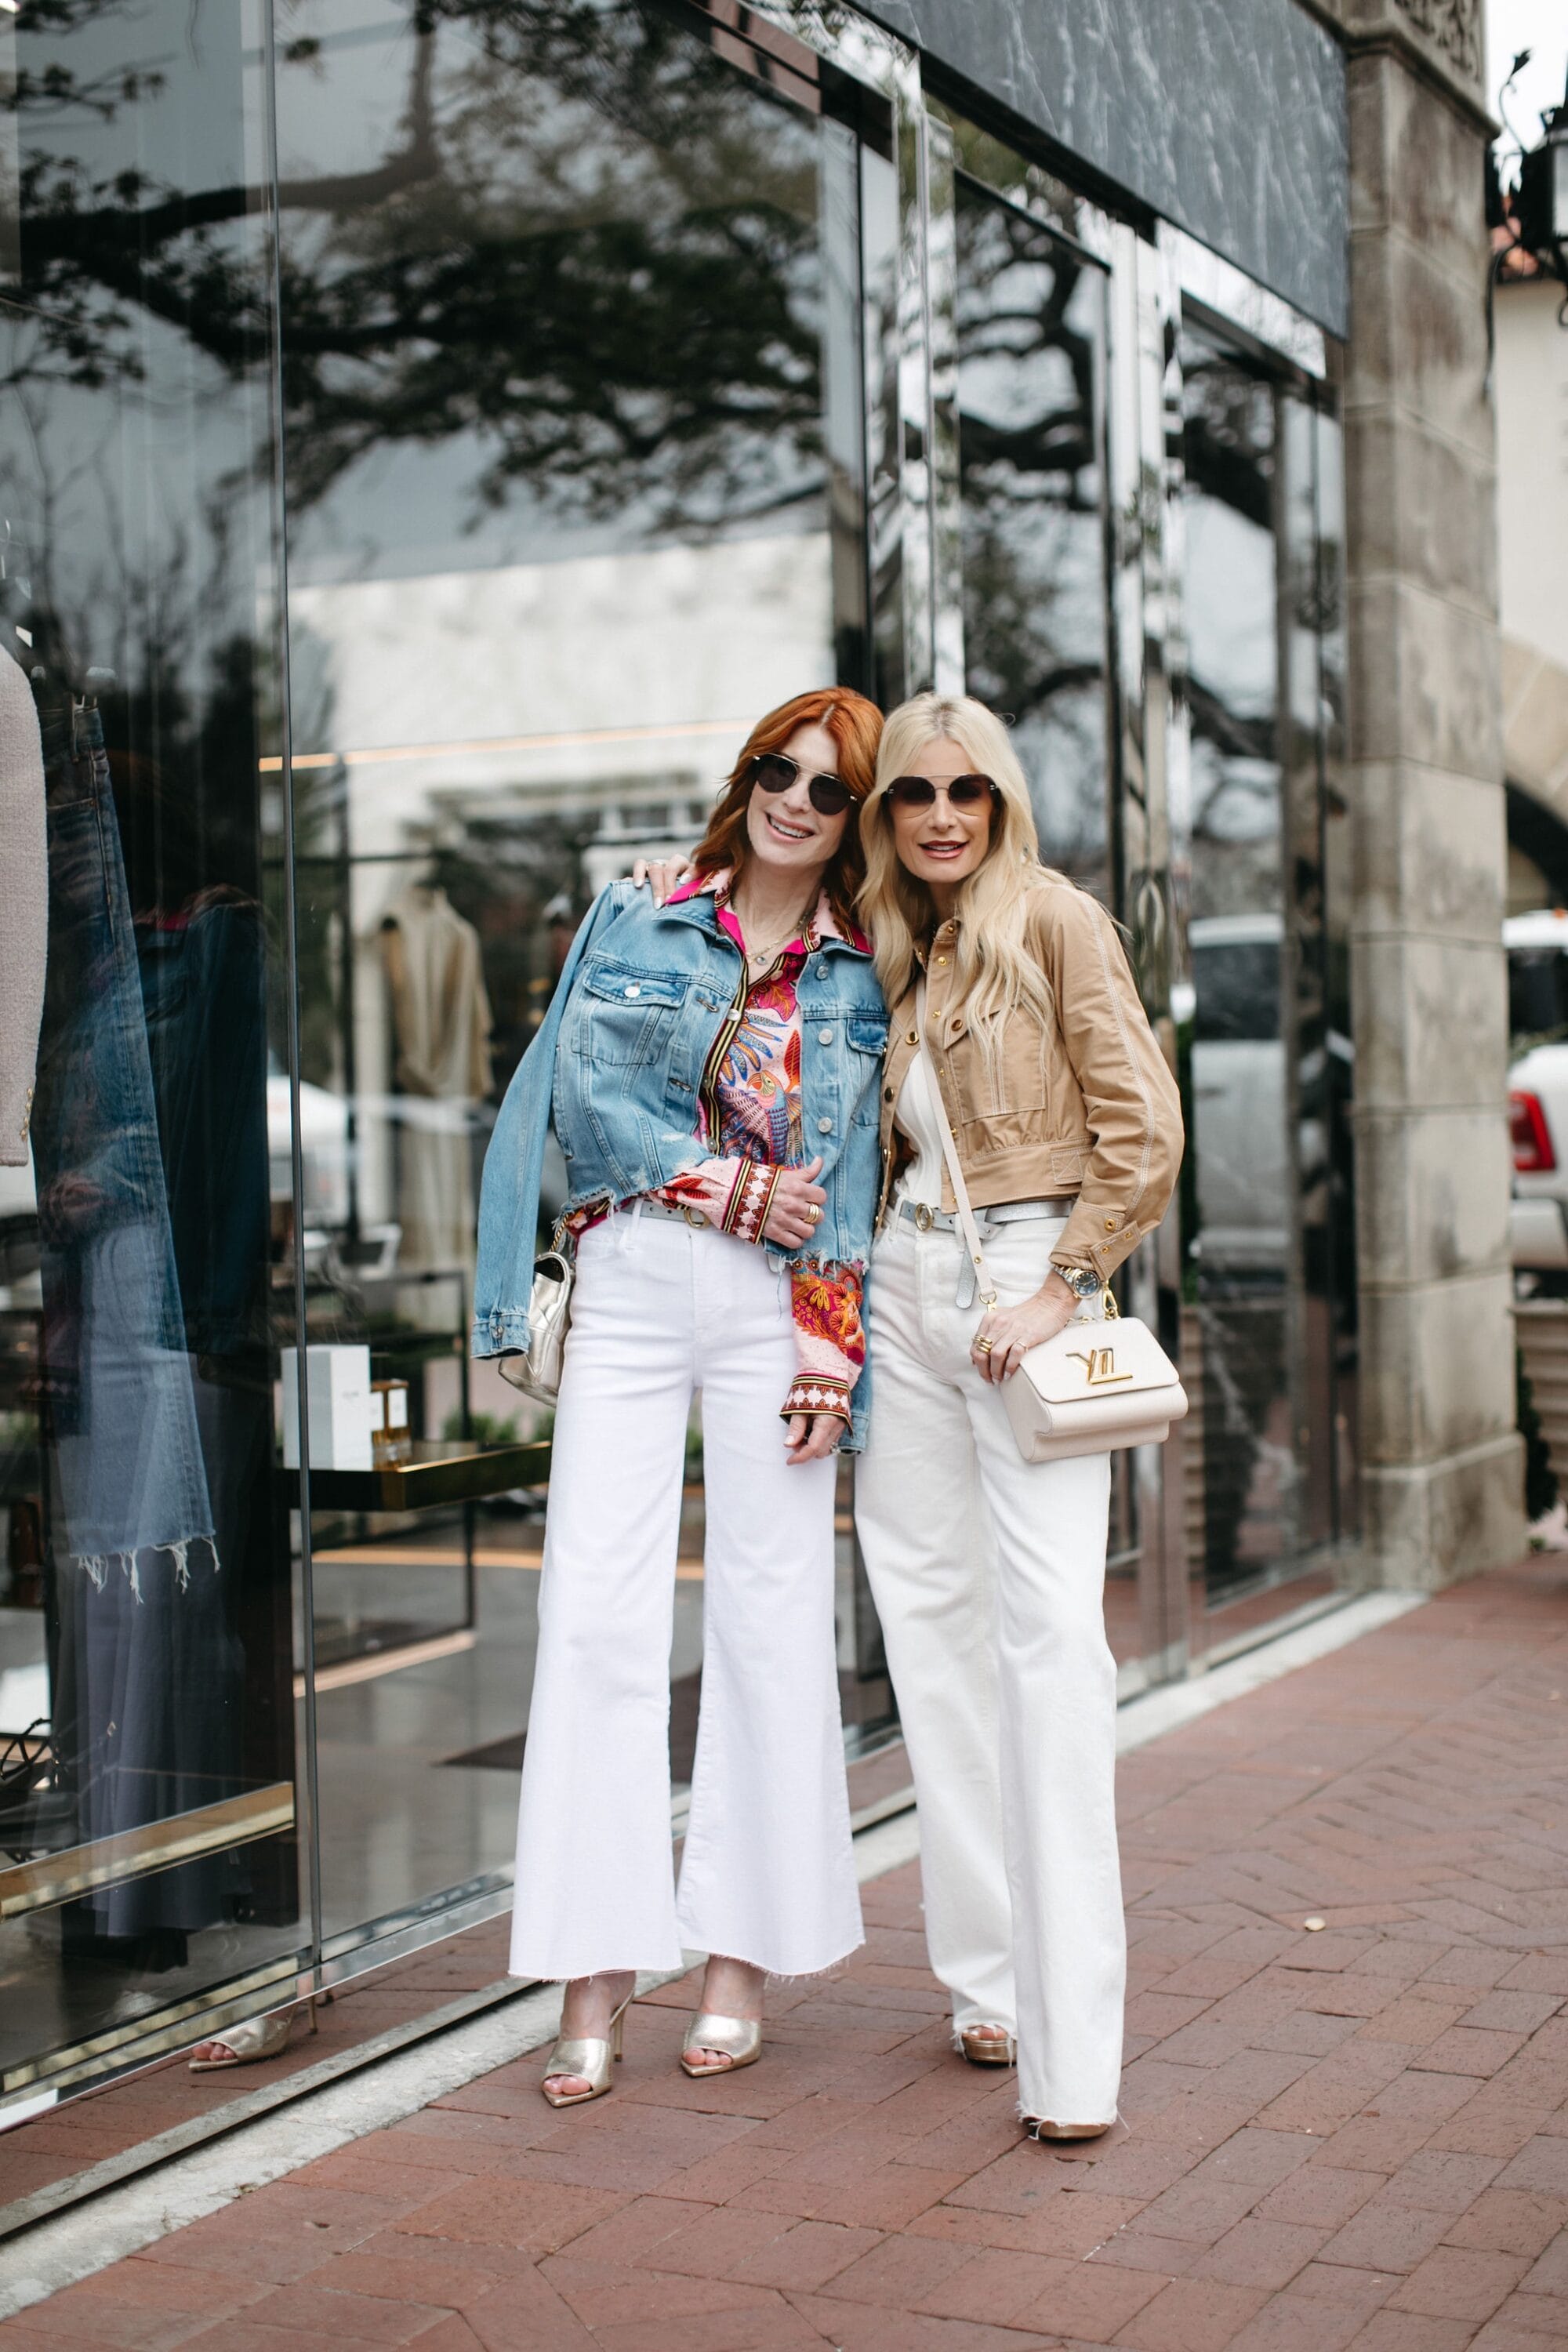 Cathy from the Middle page with Heather from SoHeather both wearing white denim with spring jackets as one of 2 ways to style white denim.